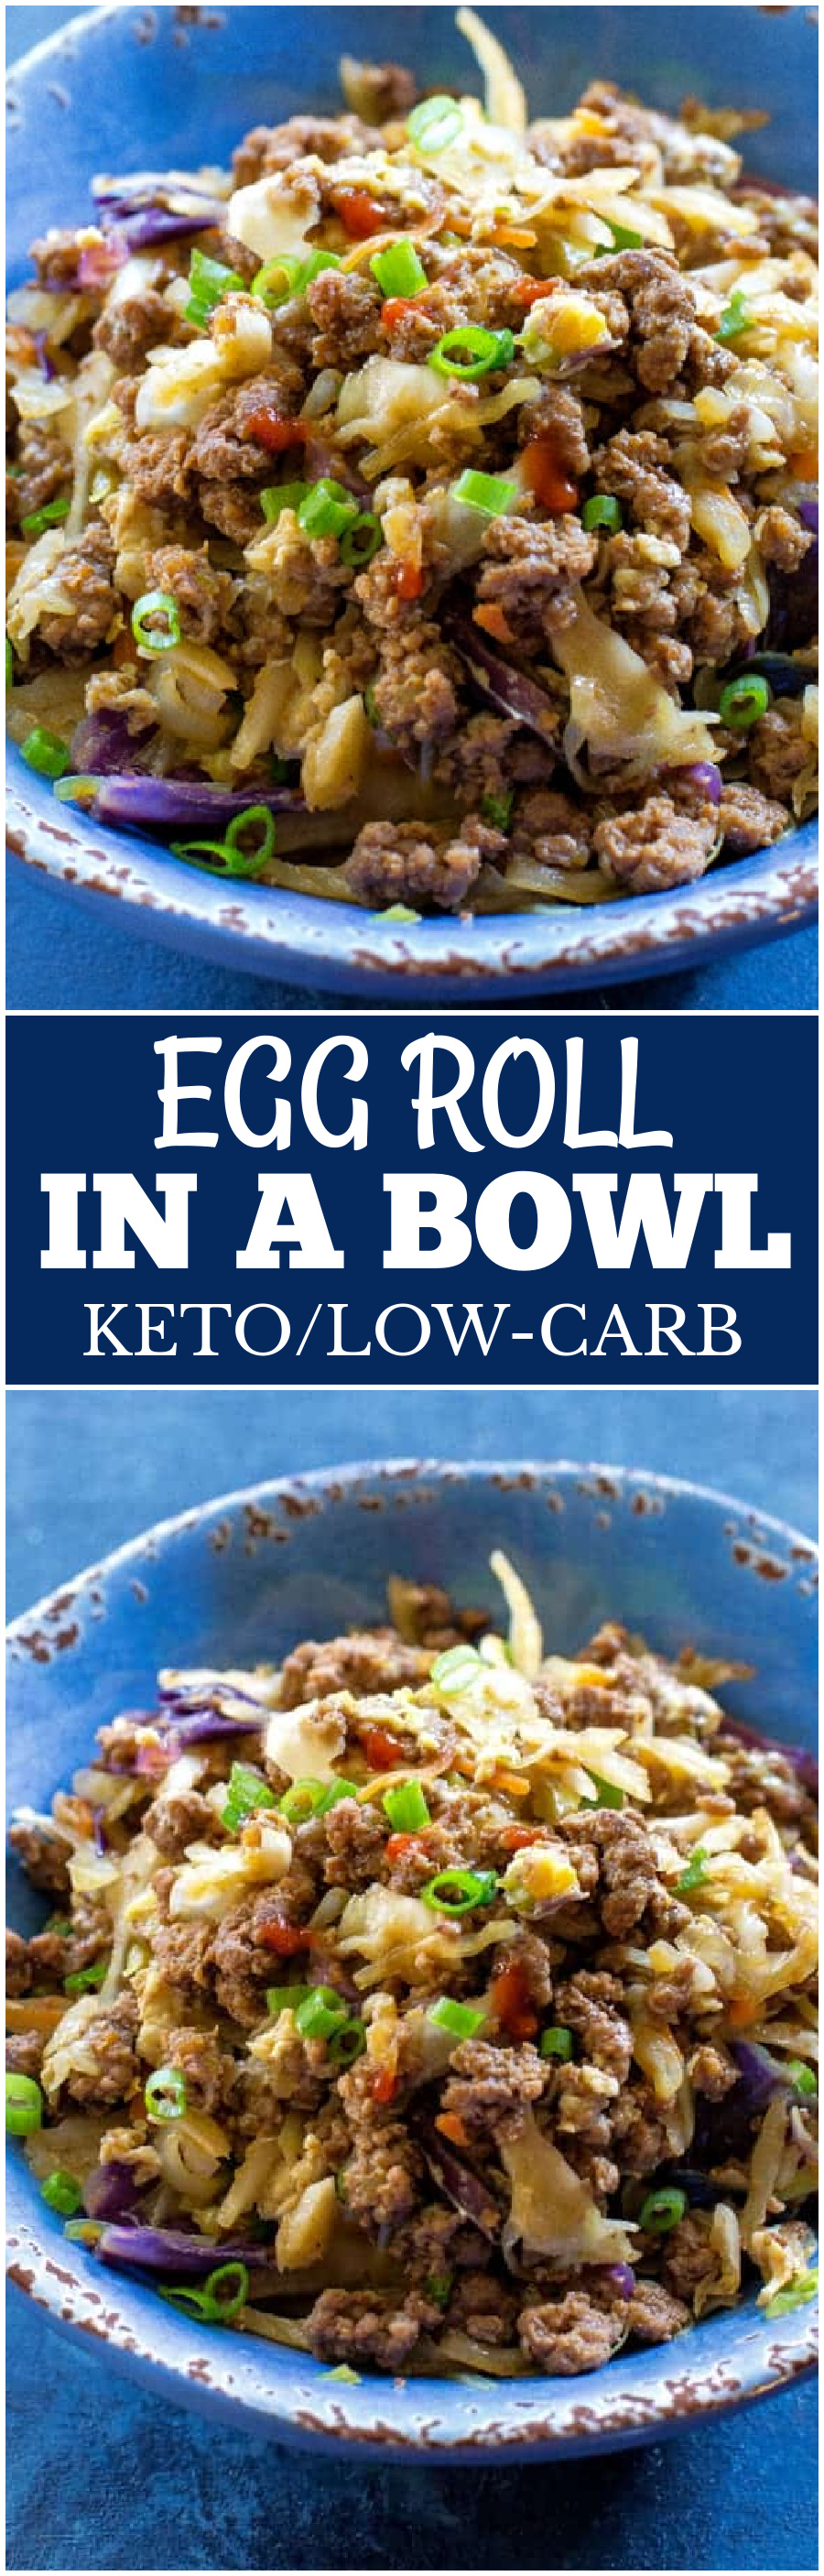 https://www.the-girl-who-ate-everything.com/wp-content/uploads/2021/05/egg-roll-in-a-bowl.jpg